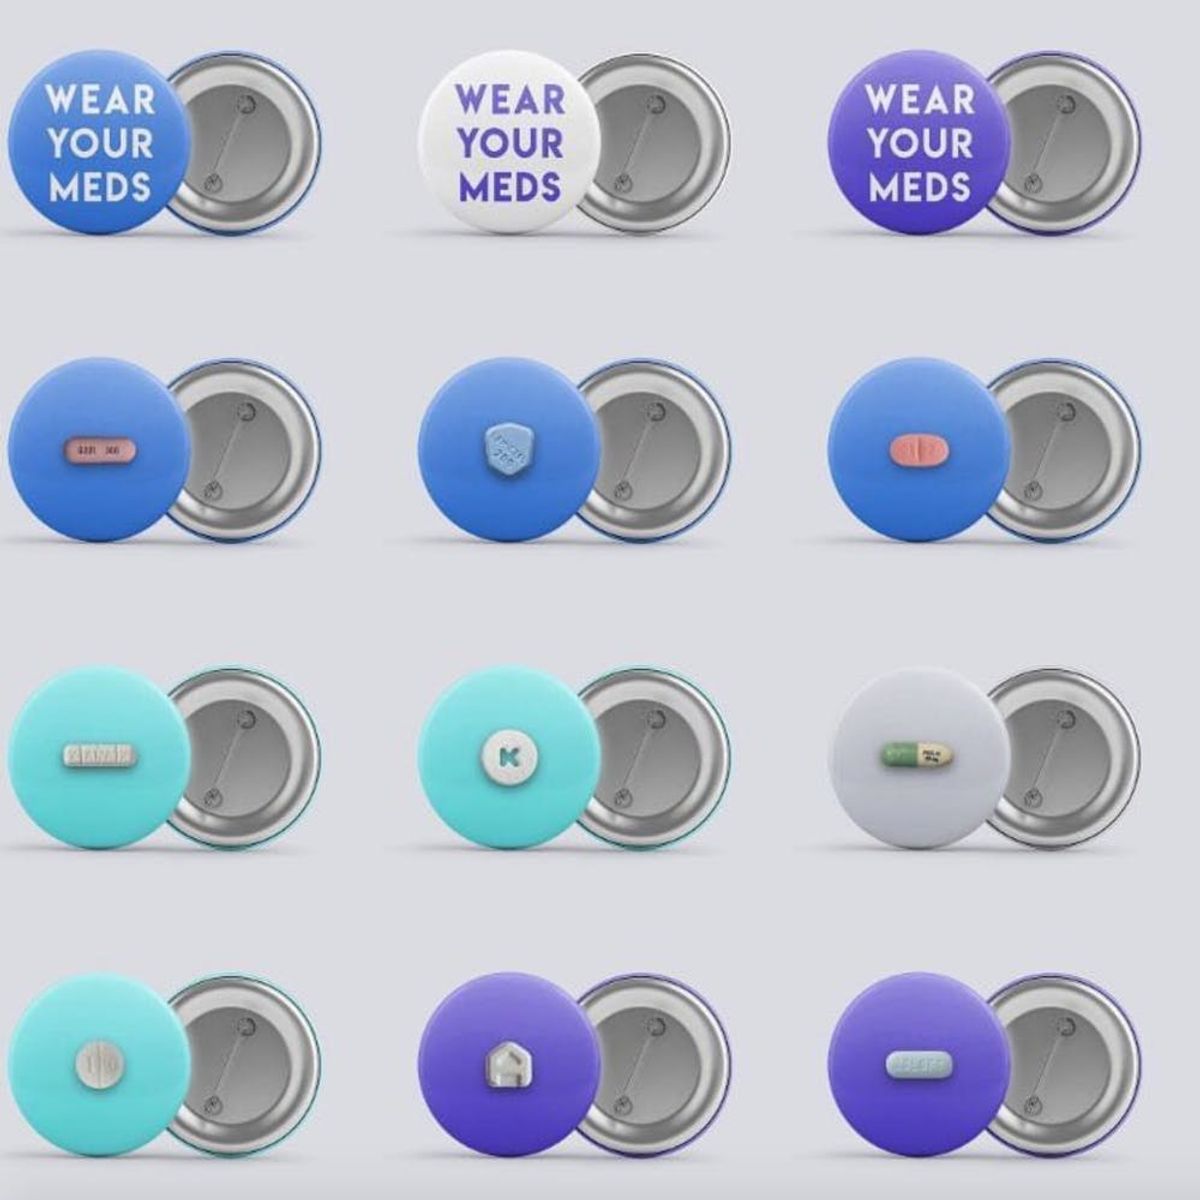 Now You Can ‘Wear Your Meds’ to Fight Stigma Against Mental Illness Medications